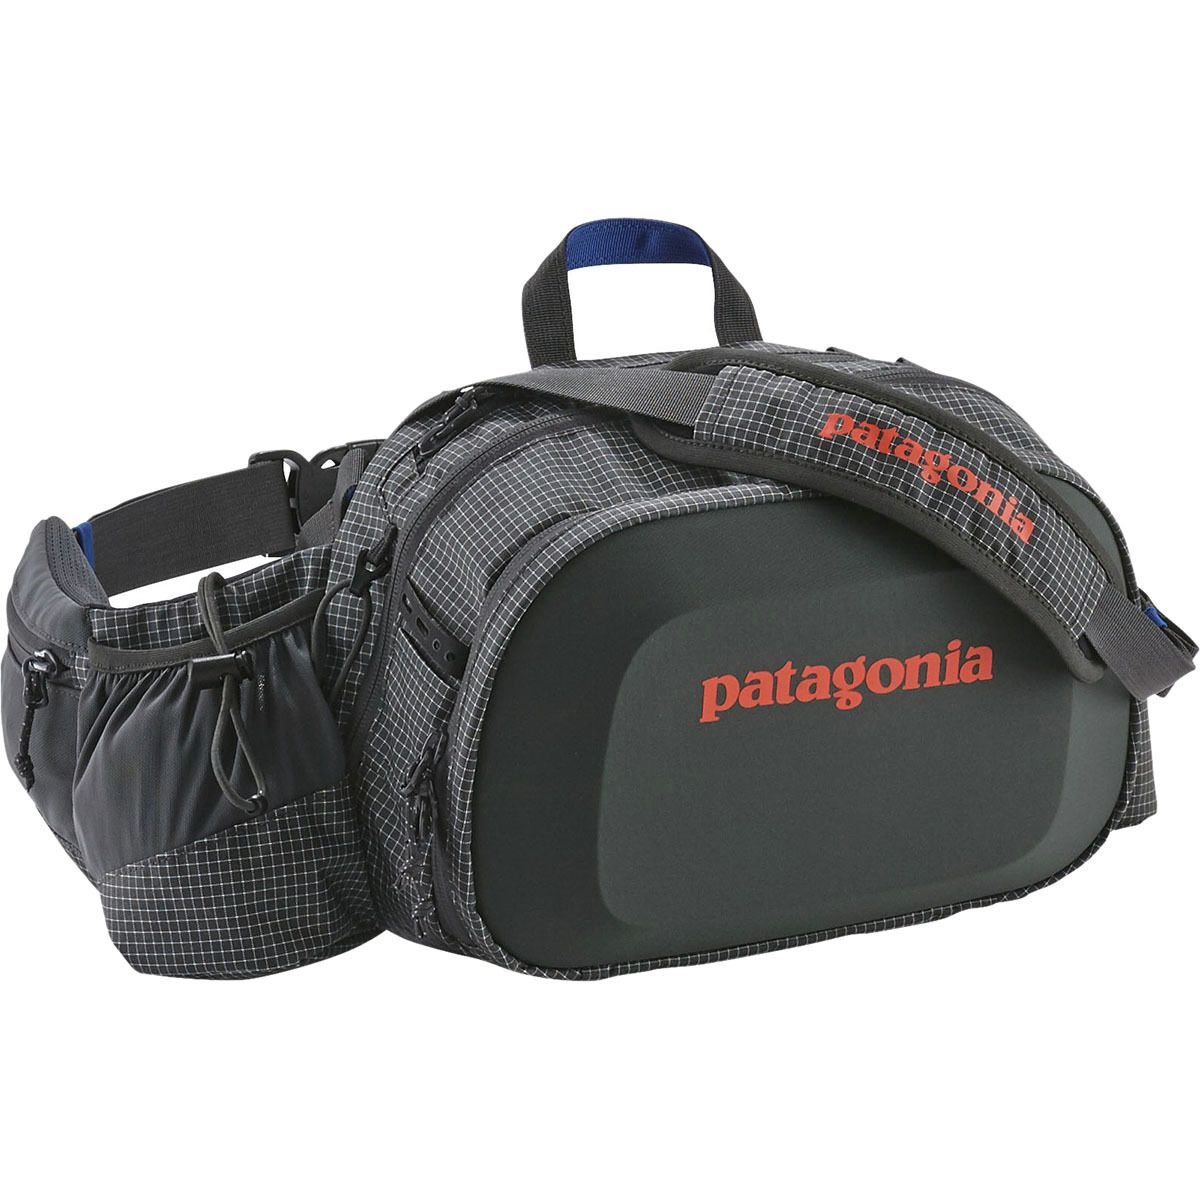 Patagonia Stealth 6L Pack Fishing